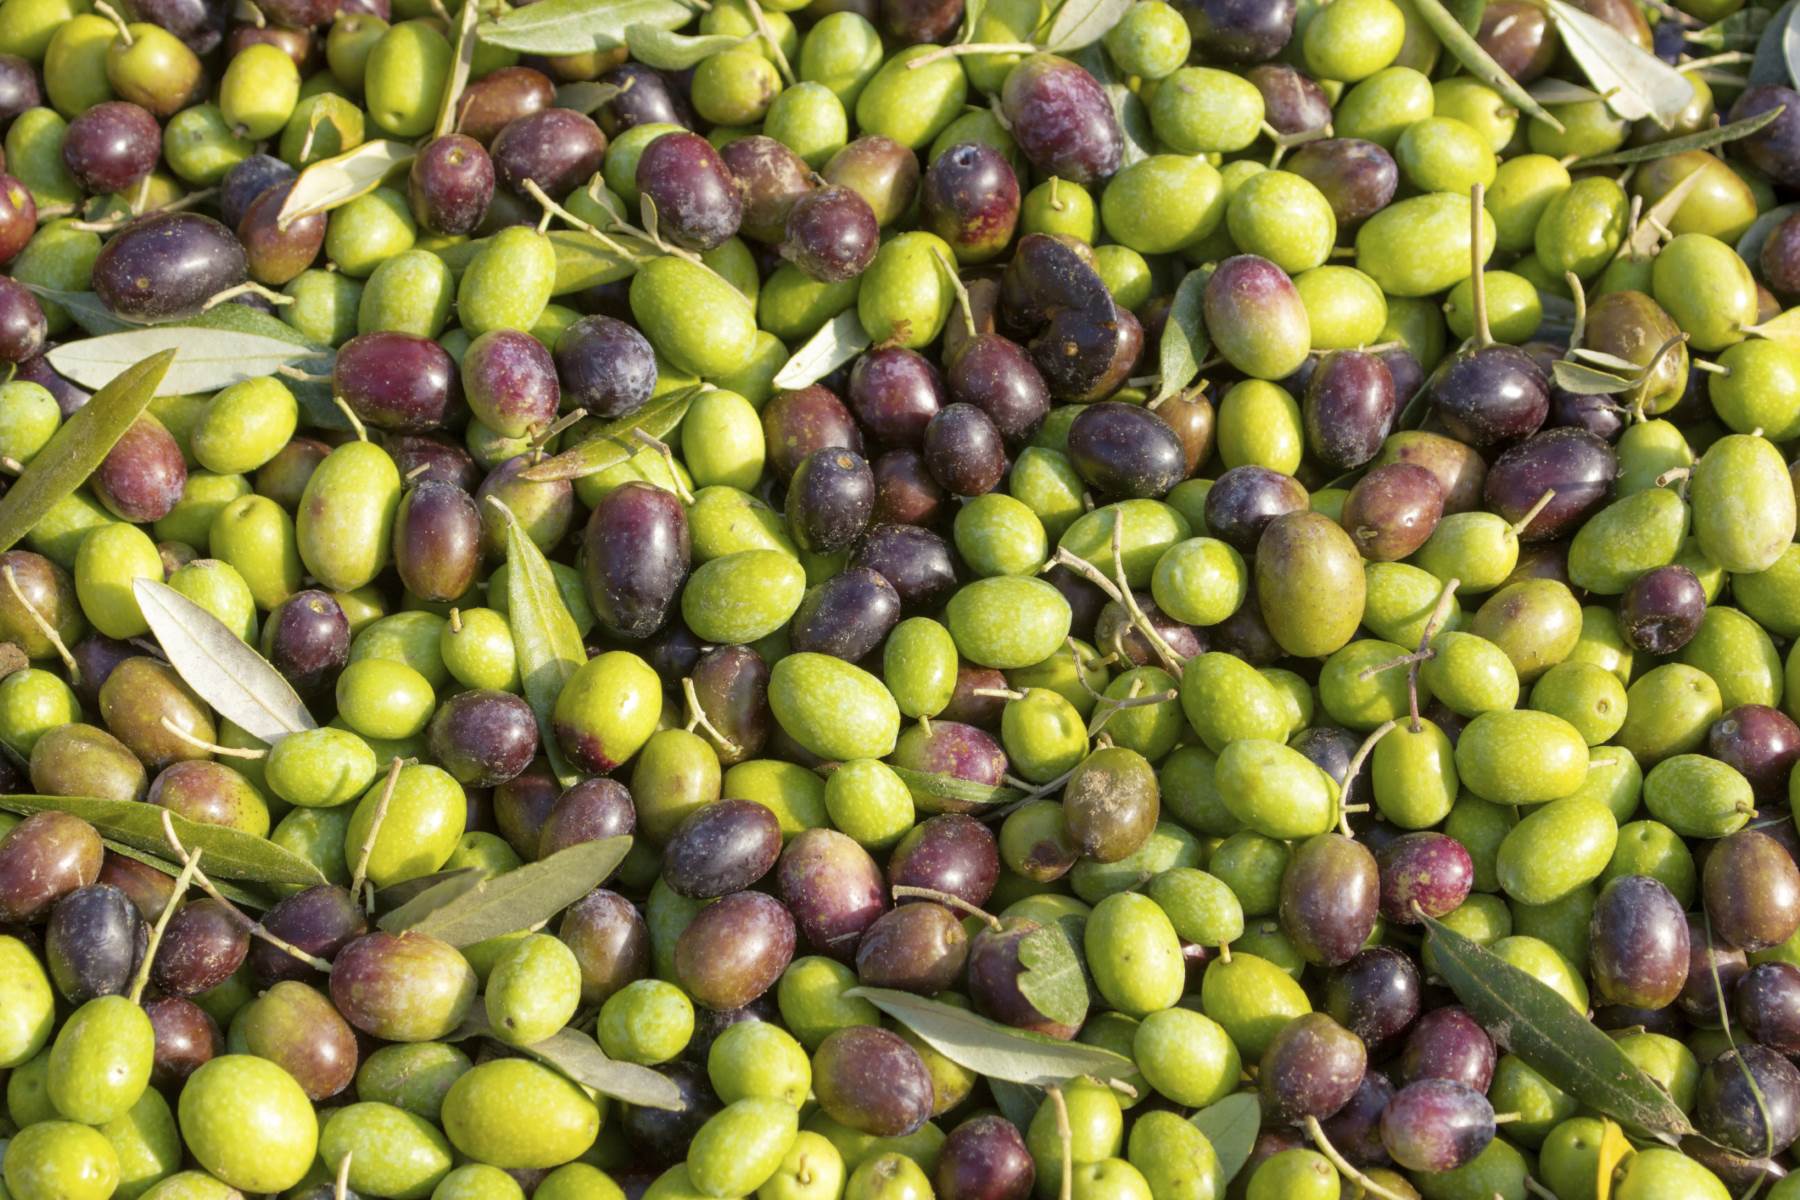 How To Grow Olives From Seeds